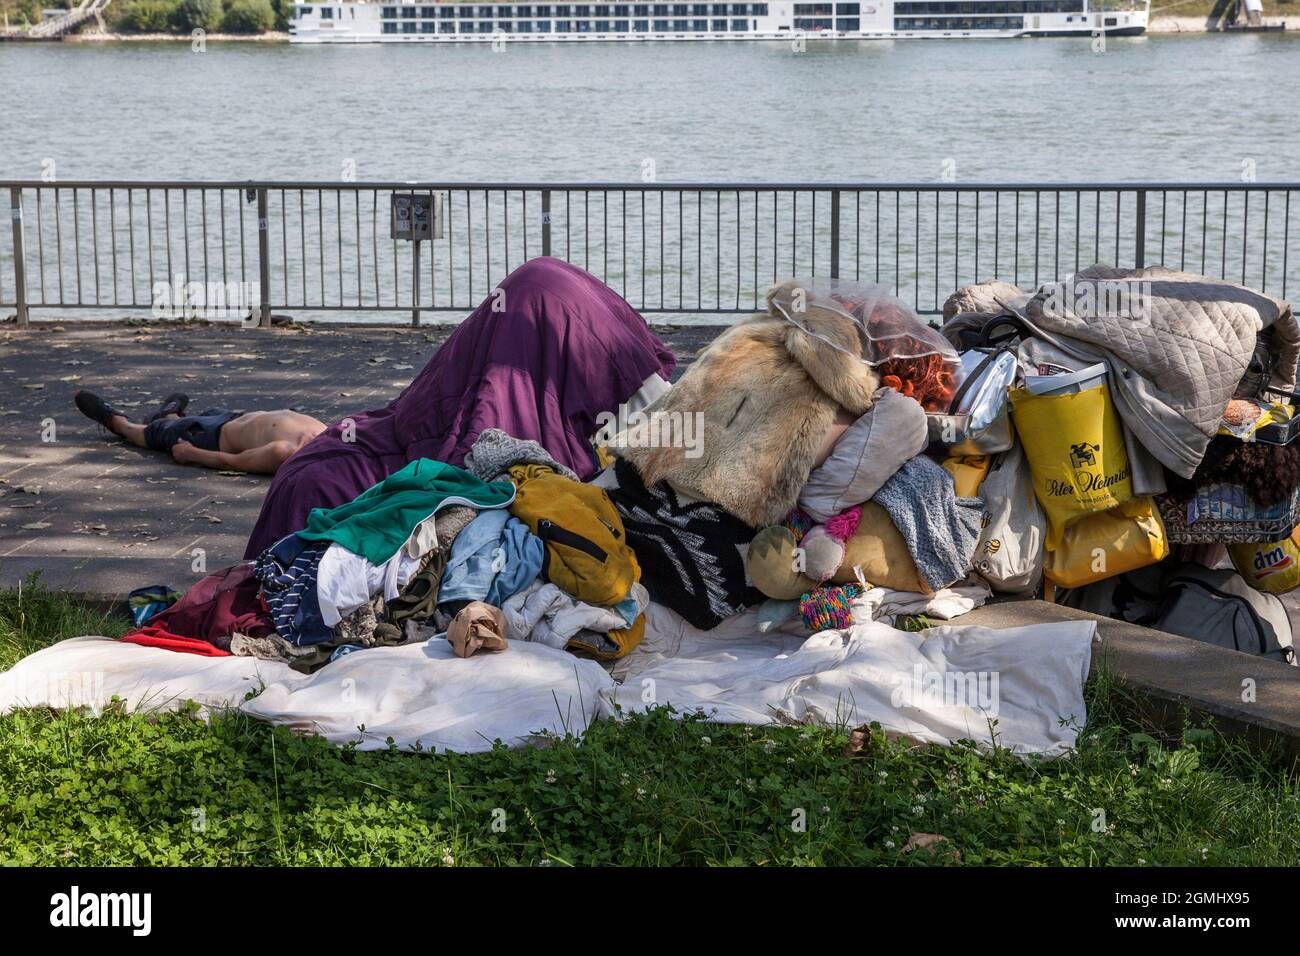 homeless people with their possessions on the banks of the Rhine, Cologne, Germany. A man lies on the sidewalk, a woman crouches with a fur cape on he Stock Photo